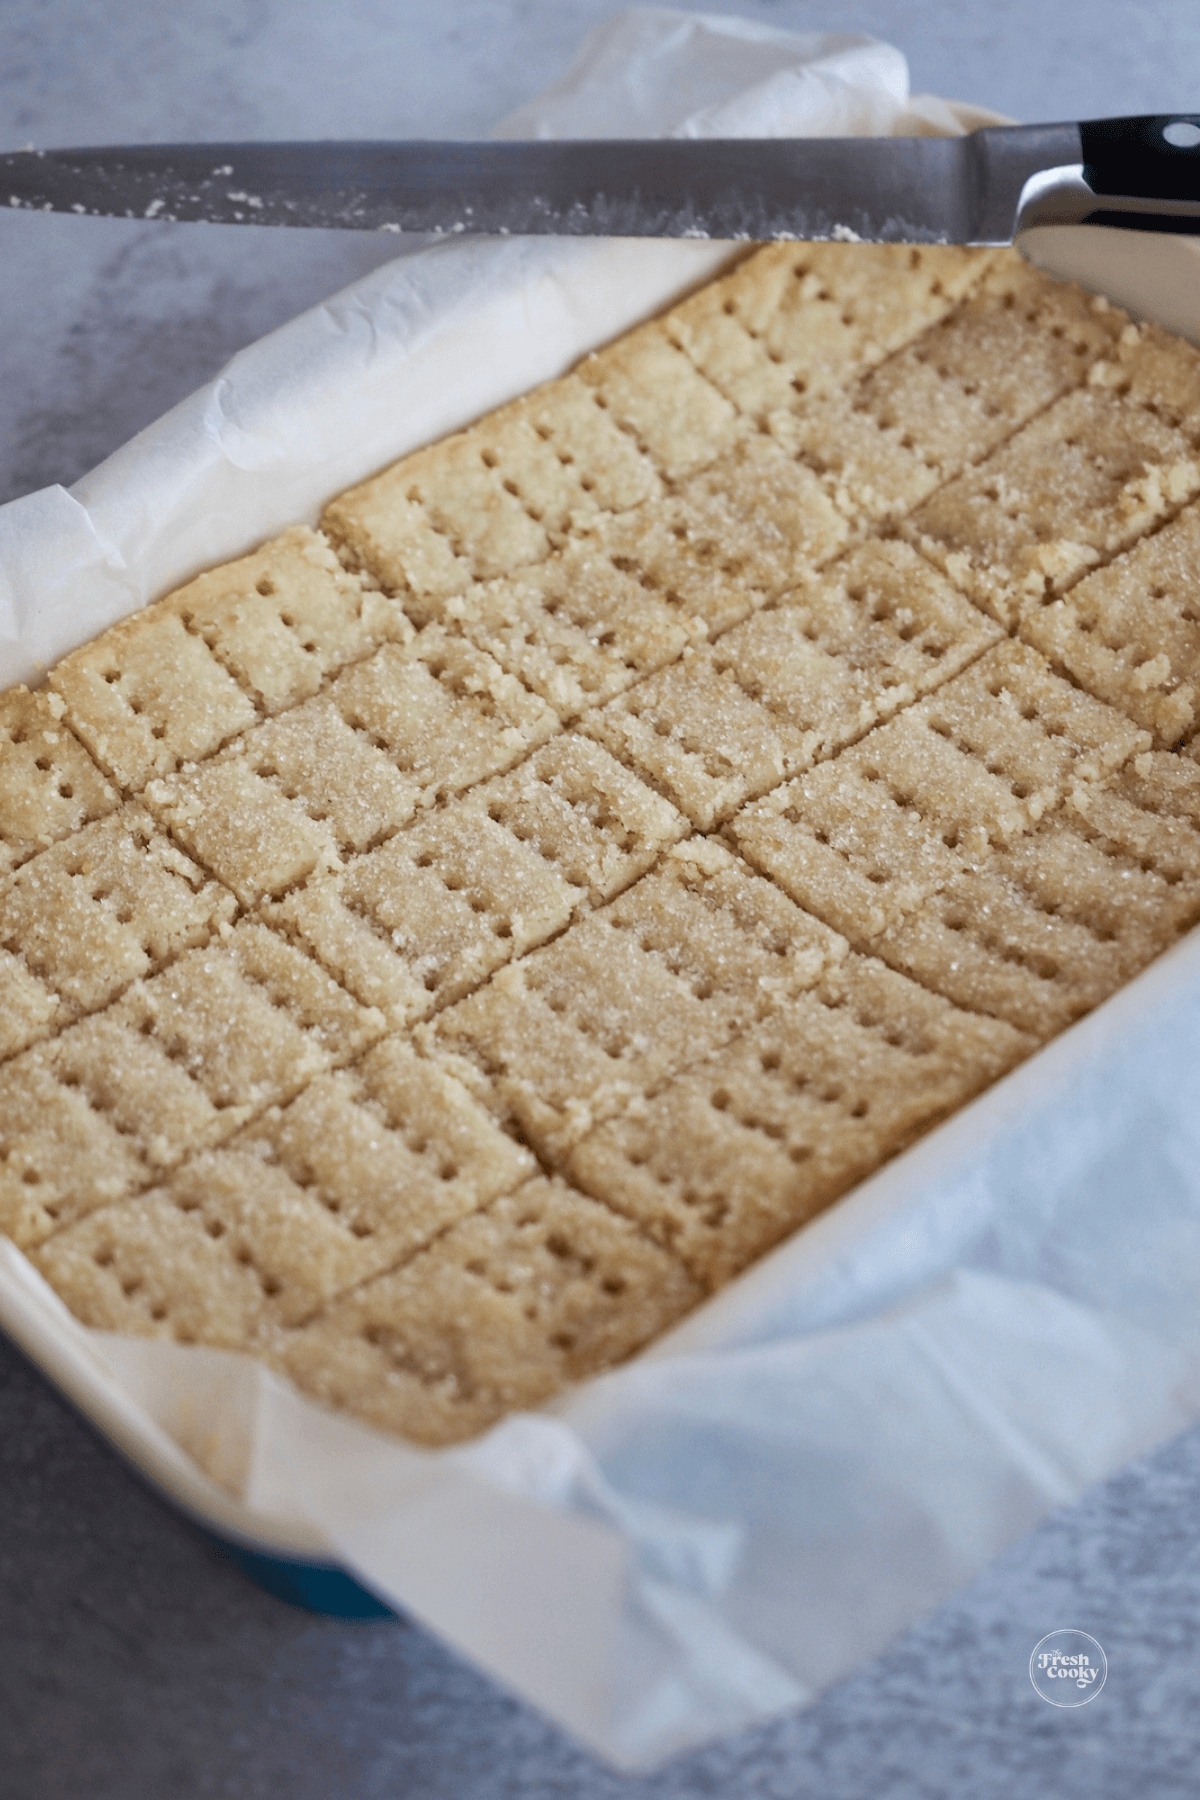 https://www.thefreshcooky.com/wp-content/uploads/2020/11/cooling-shortbread.png